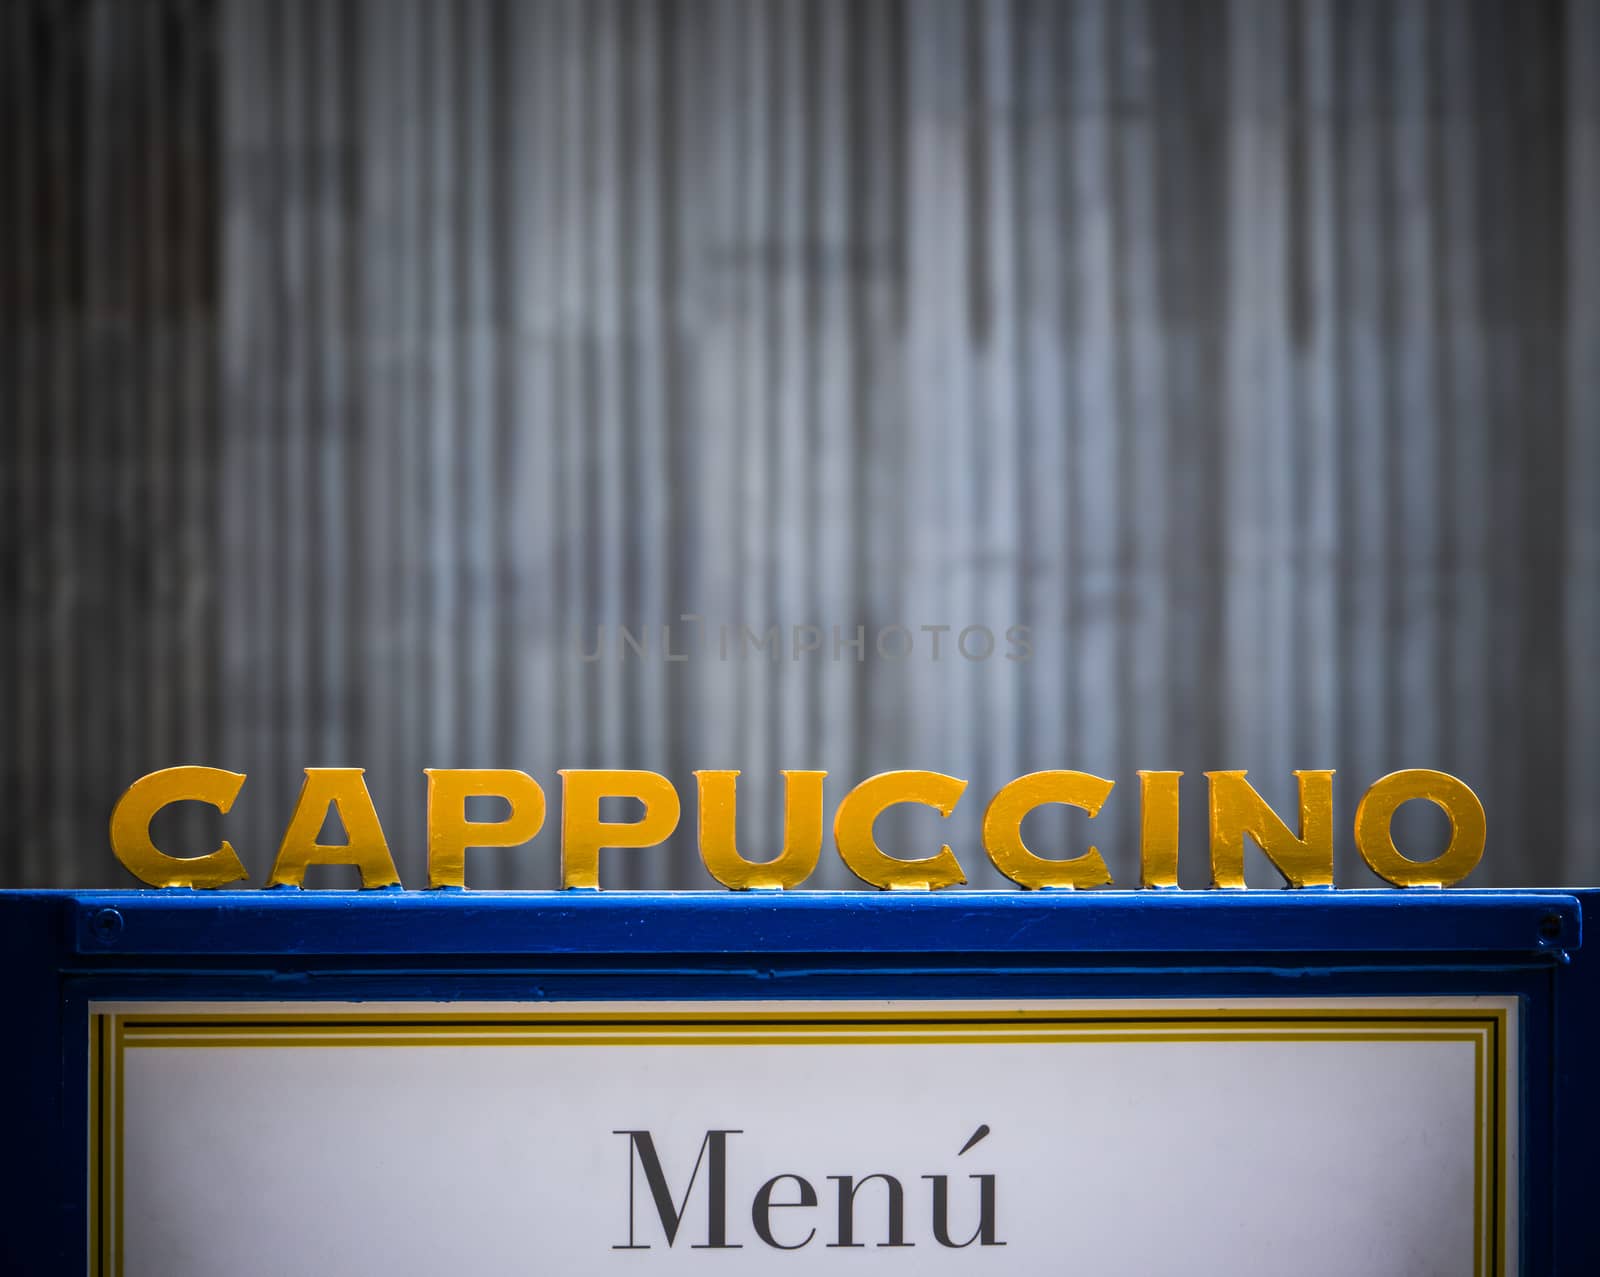 A Sign For Cappuccino At An Urban Coffee Shop With Copy Space